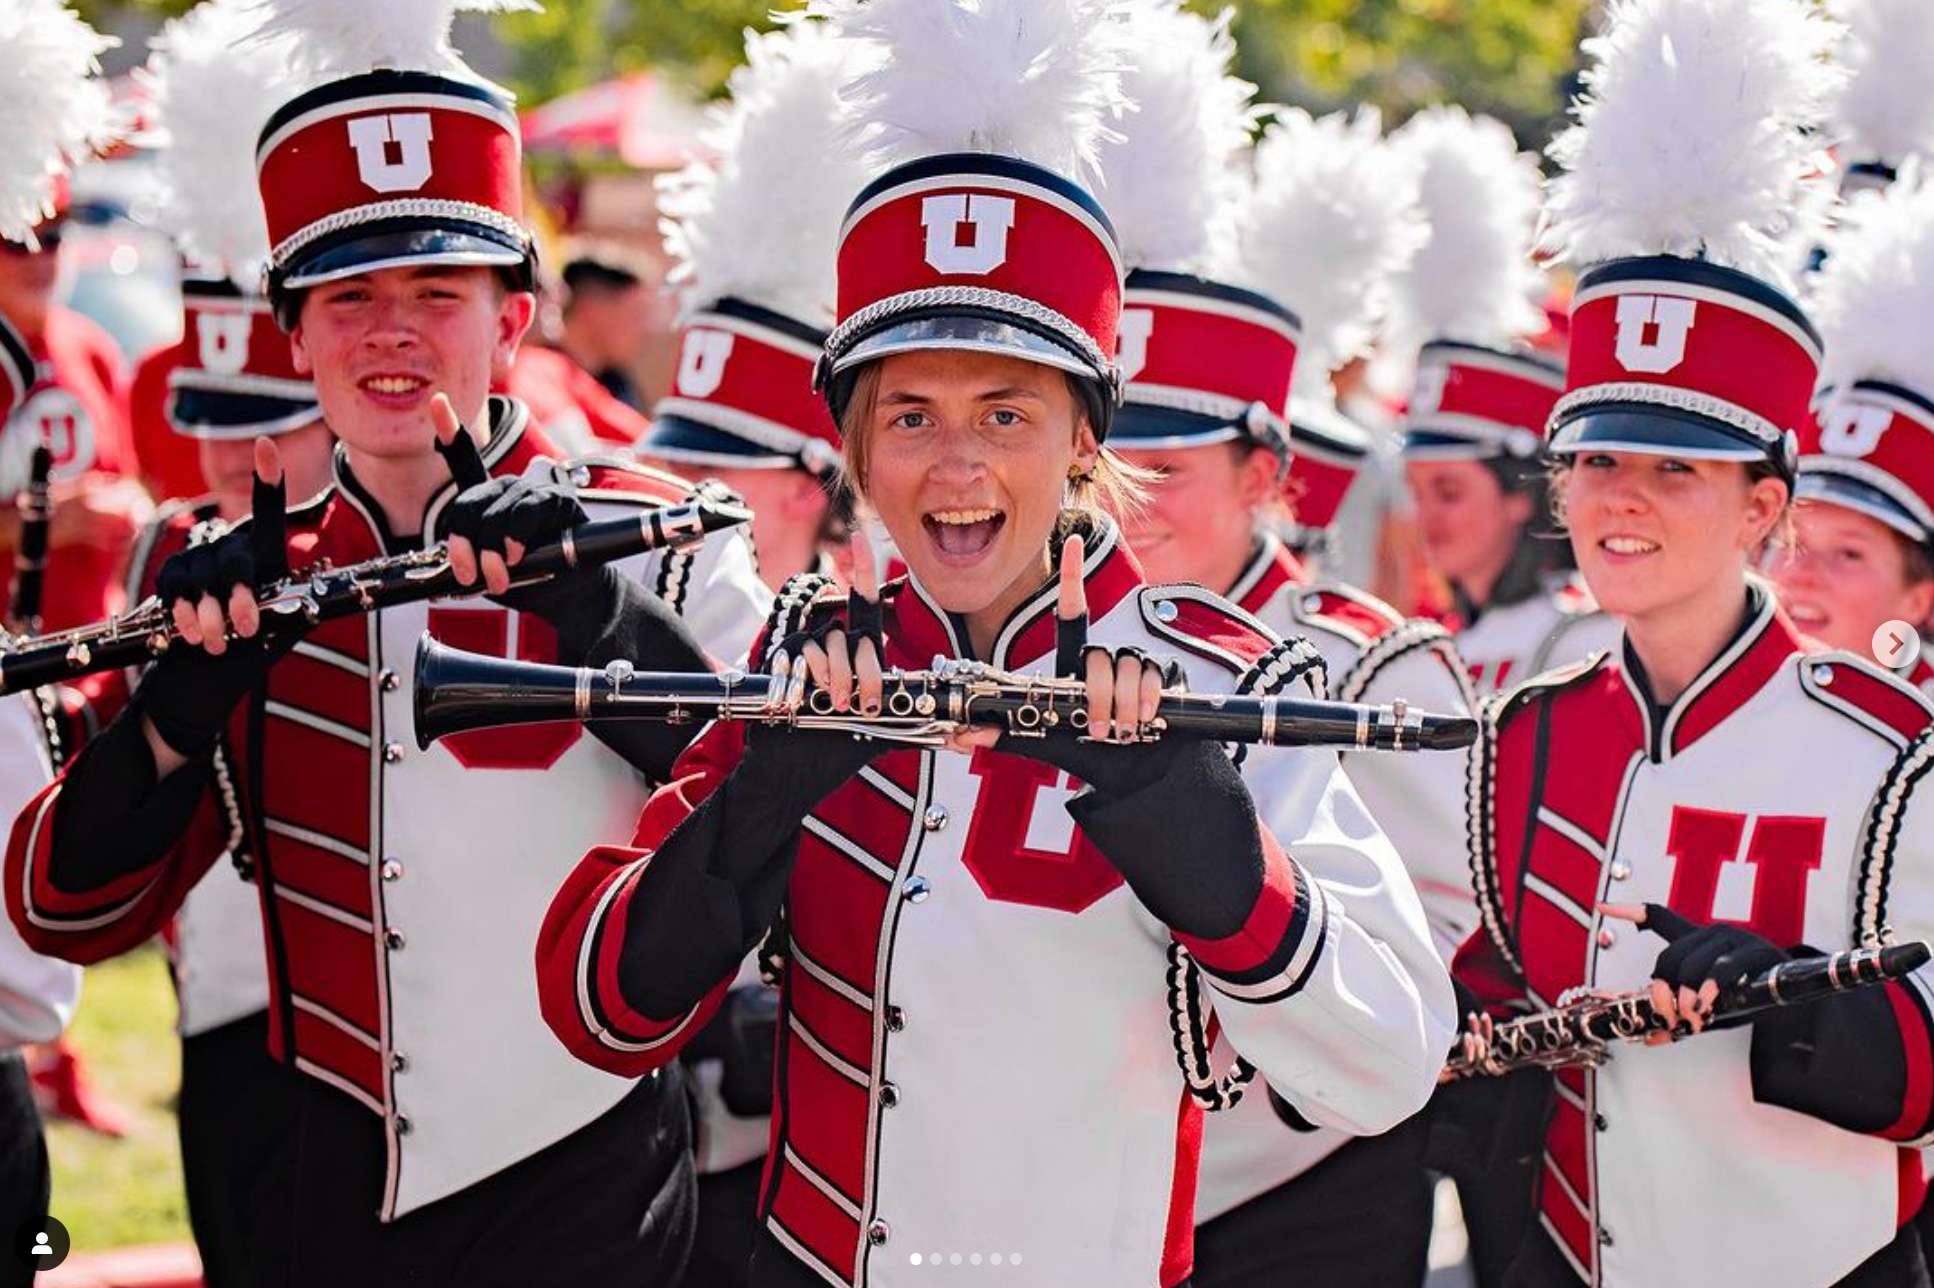 The Marching Utes